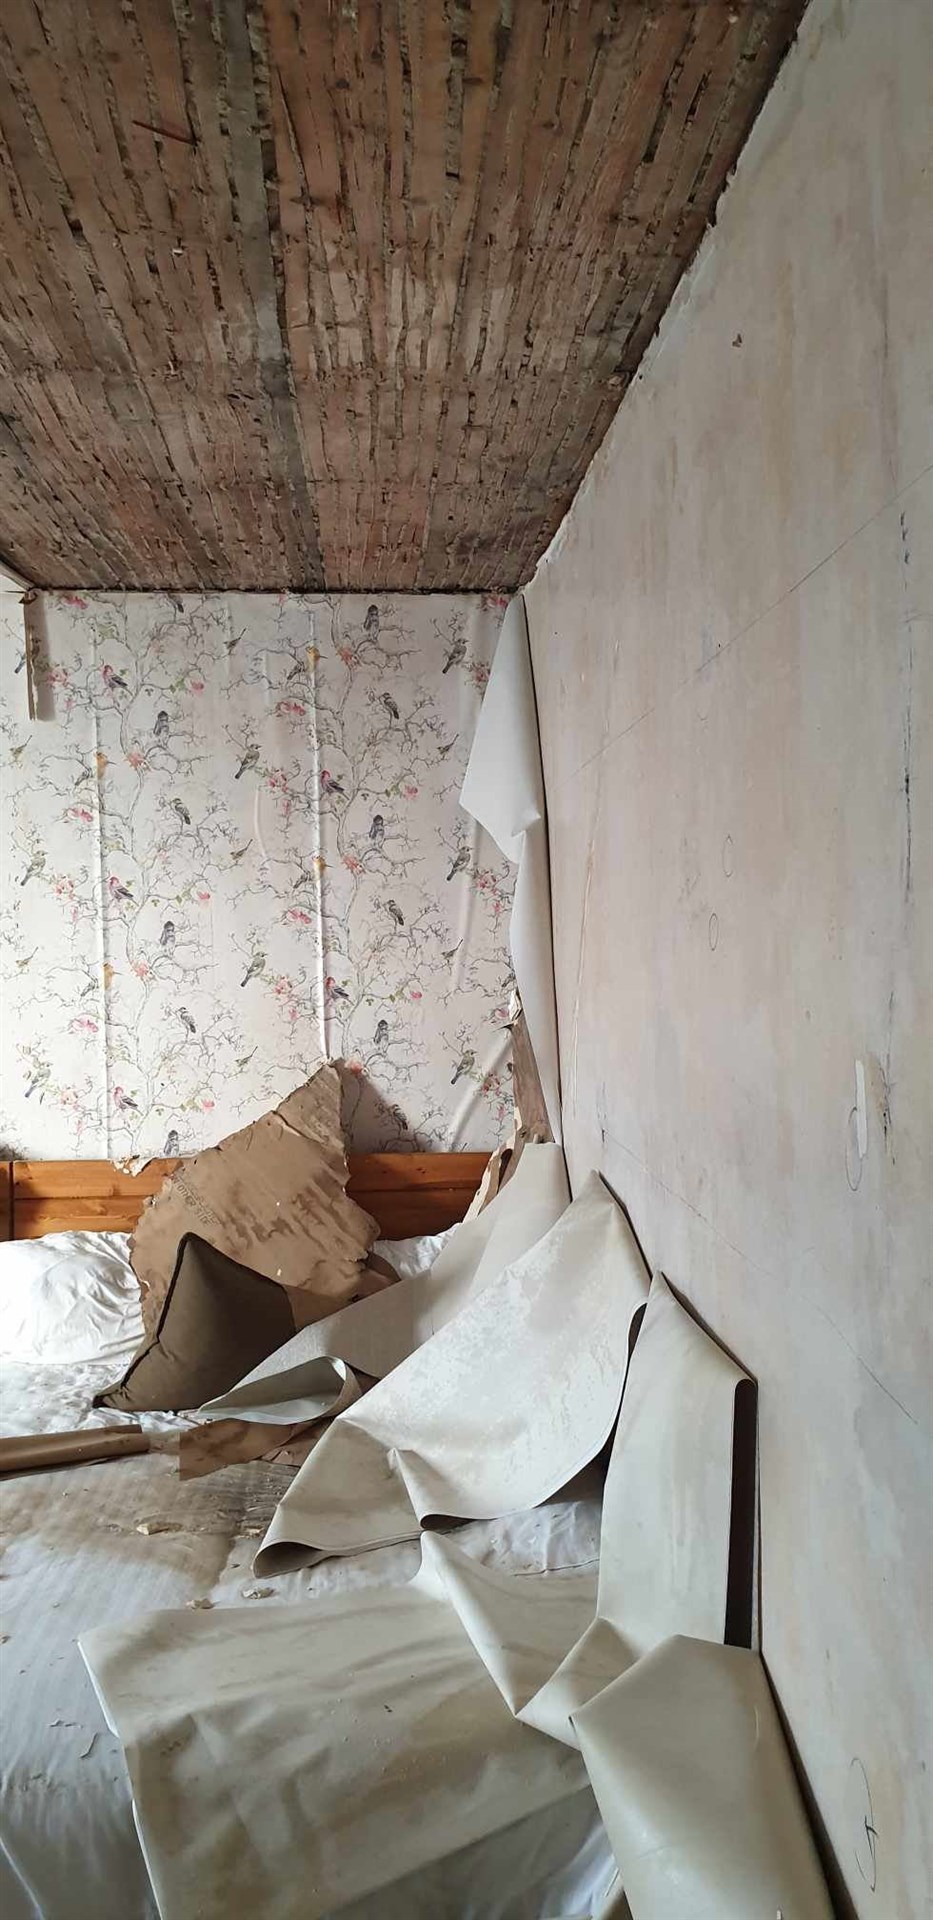 All the rooms have been destroyed, such as this bedroom